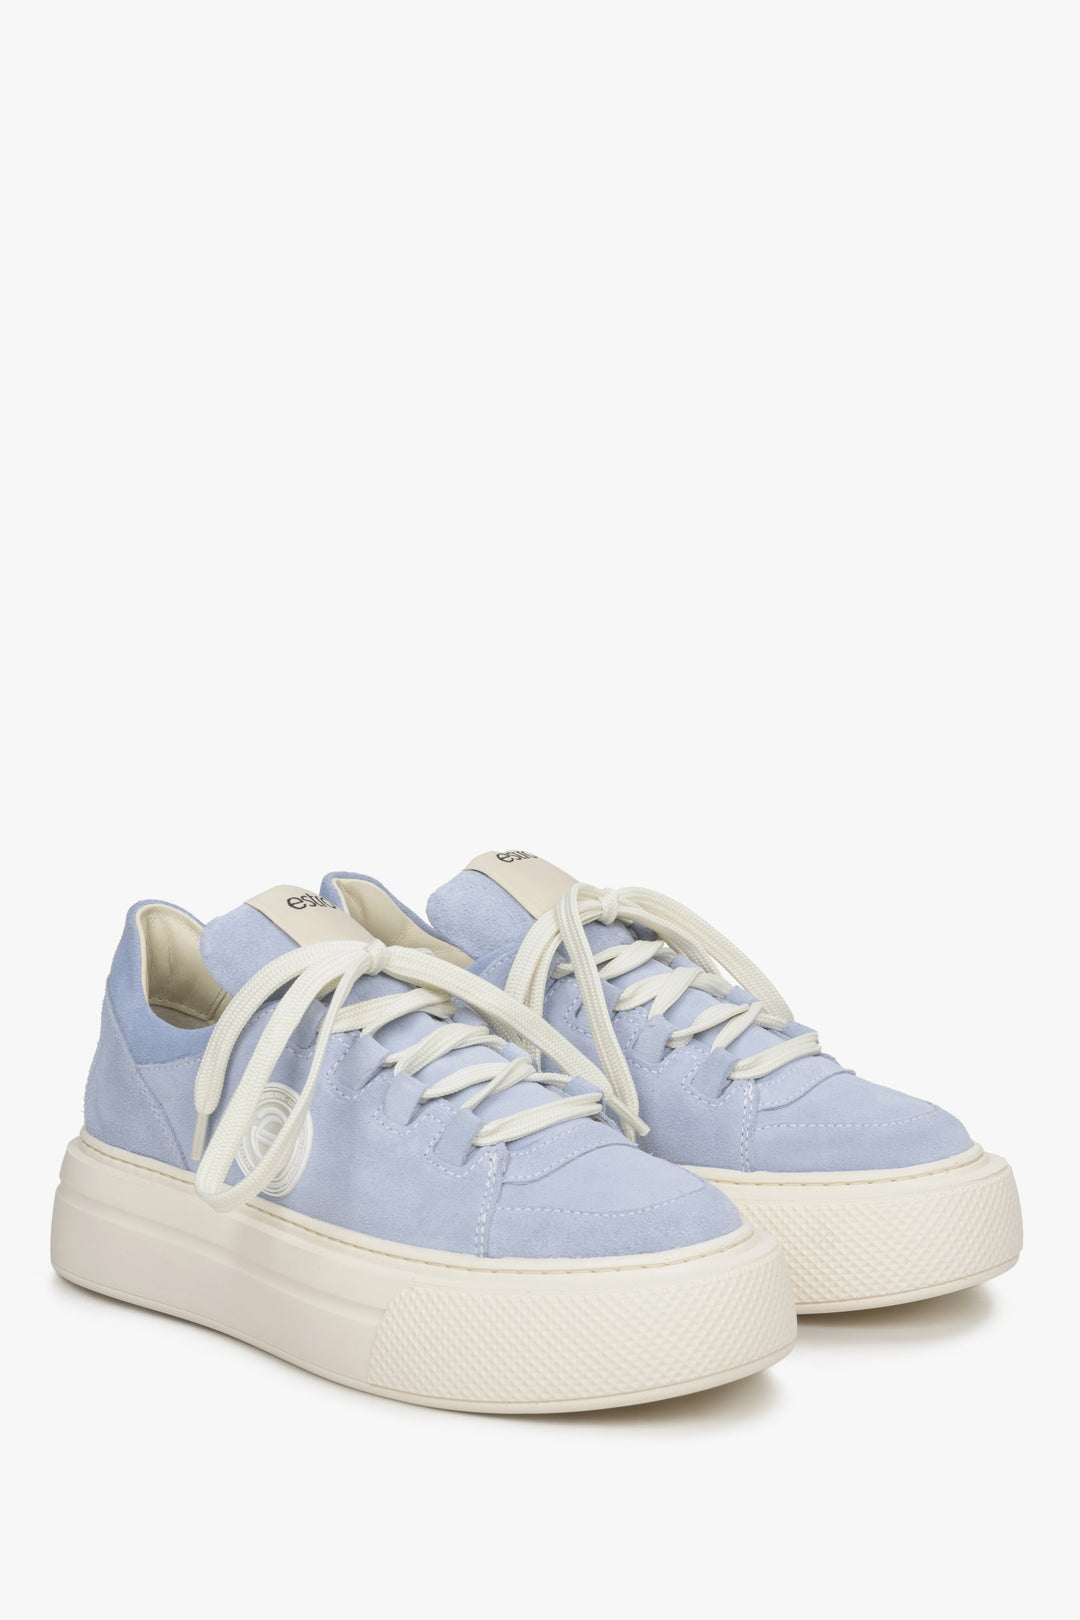 Women's blue platform sneakers made of genuine leather by Estro.